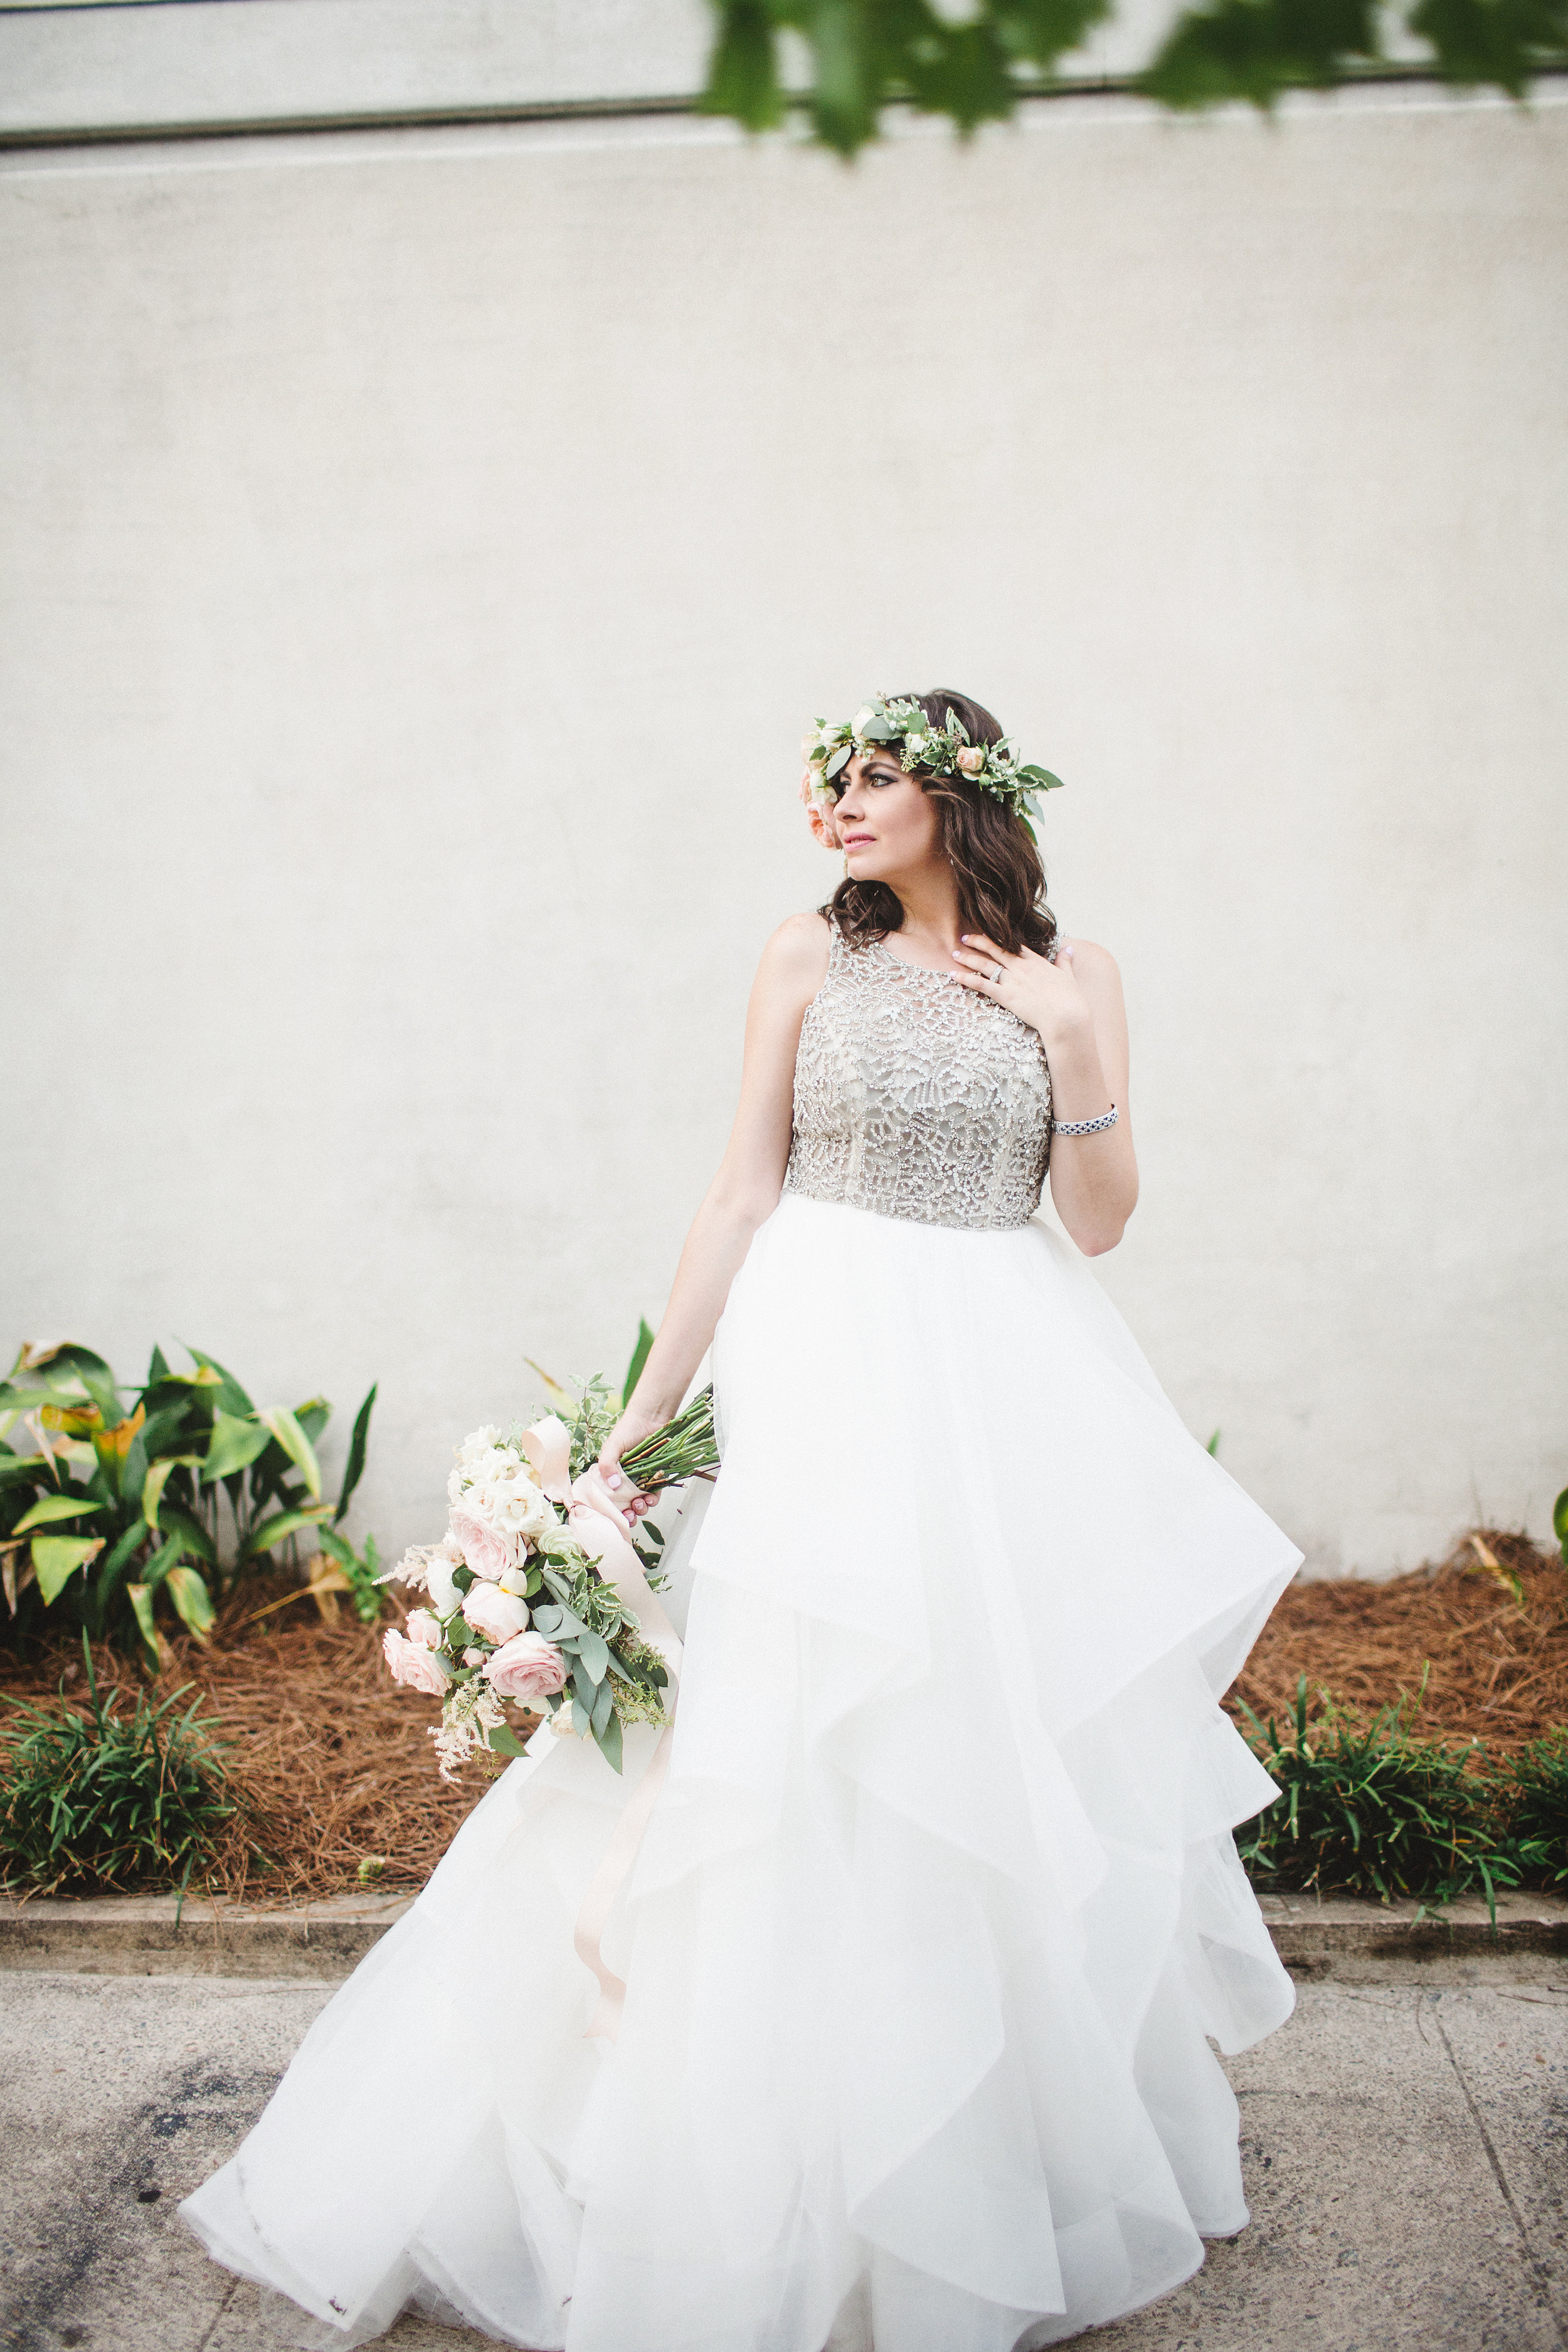 daniela-and-pedro-wedding-izzy-hudgins-photography-a-to-zinnias-whitfield-square-charles-h-morris-center-wedding-ivoyy-and-beau-bridal-boutique-dorie-hayley-paige-savannah-wedding-planner-savannah-bridal-boutique-savannah-weddings-35.jpg